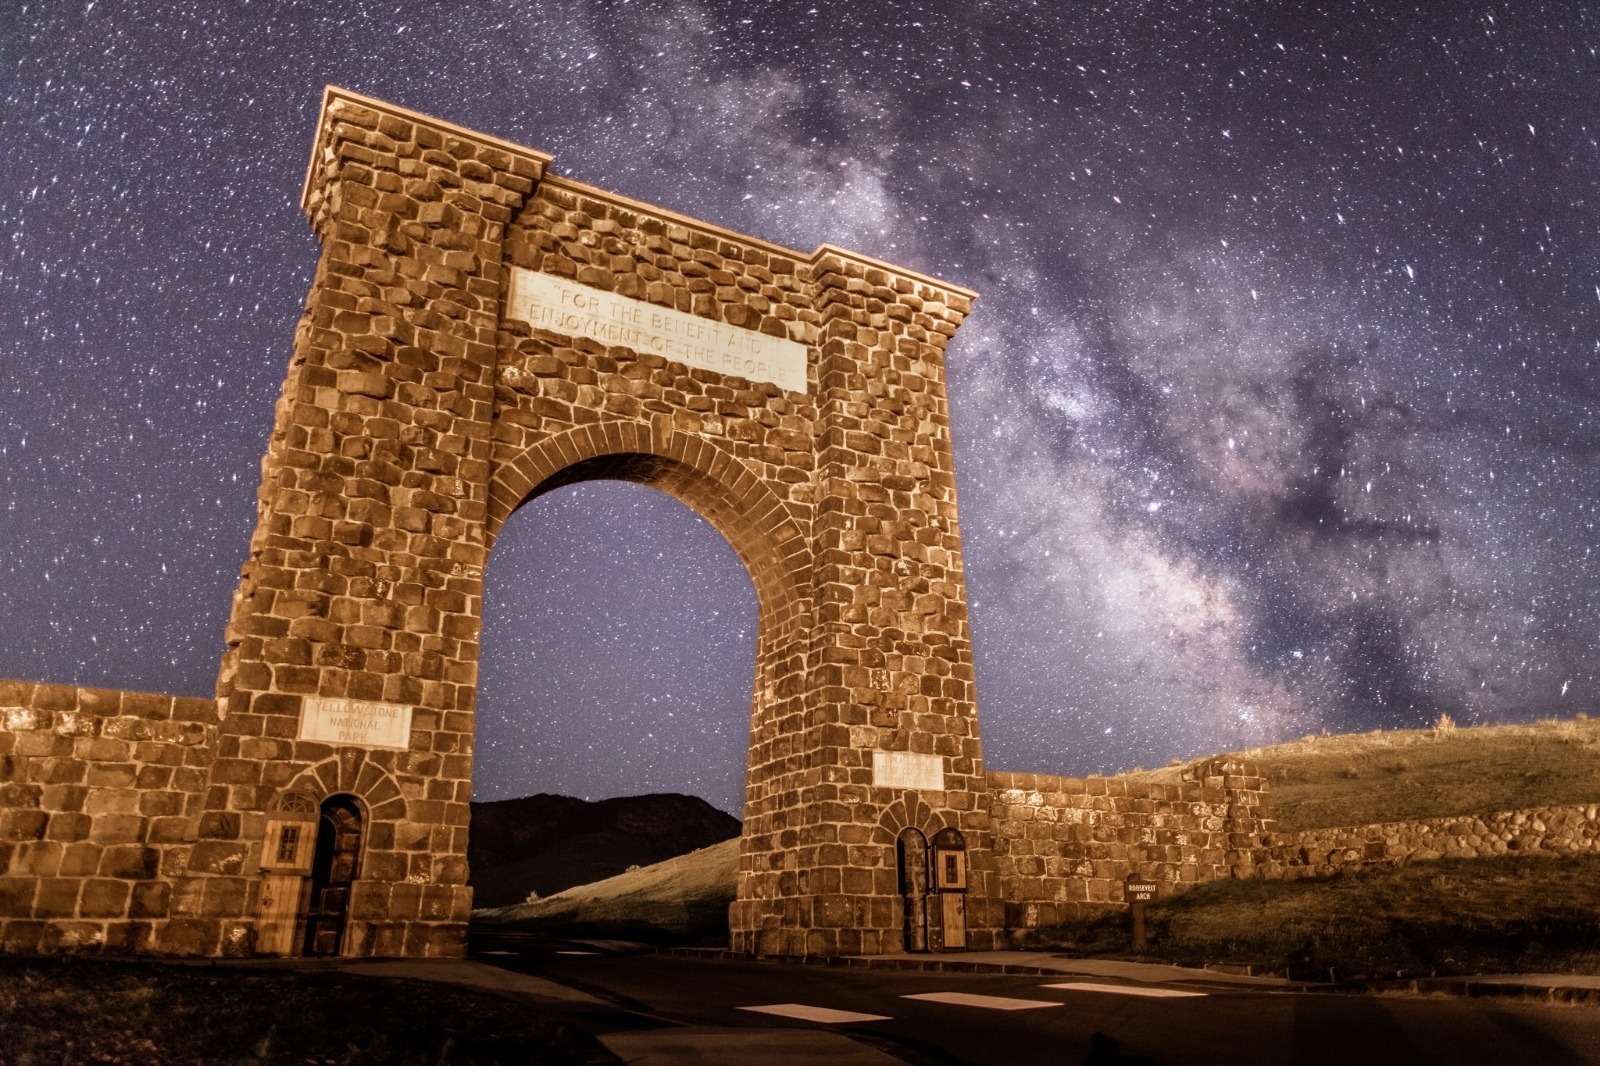 Yellowstone's Roosevelt Arch and its timeless slogan beneath the cosmos. Photo courtesy Jacob W. Frank/NPS